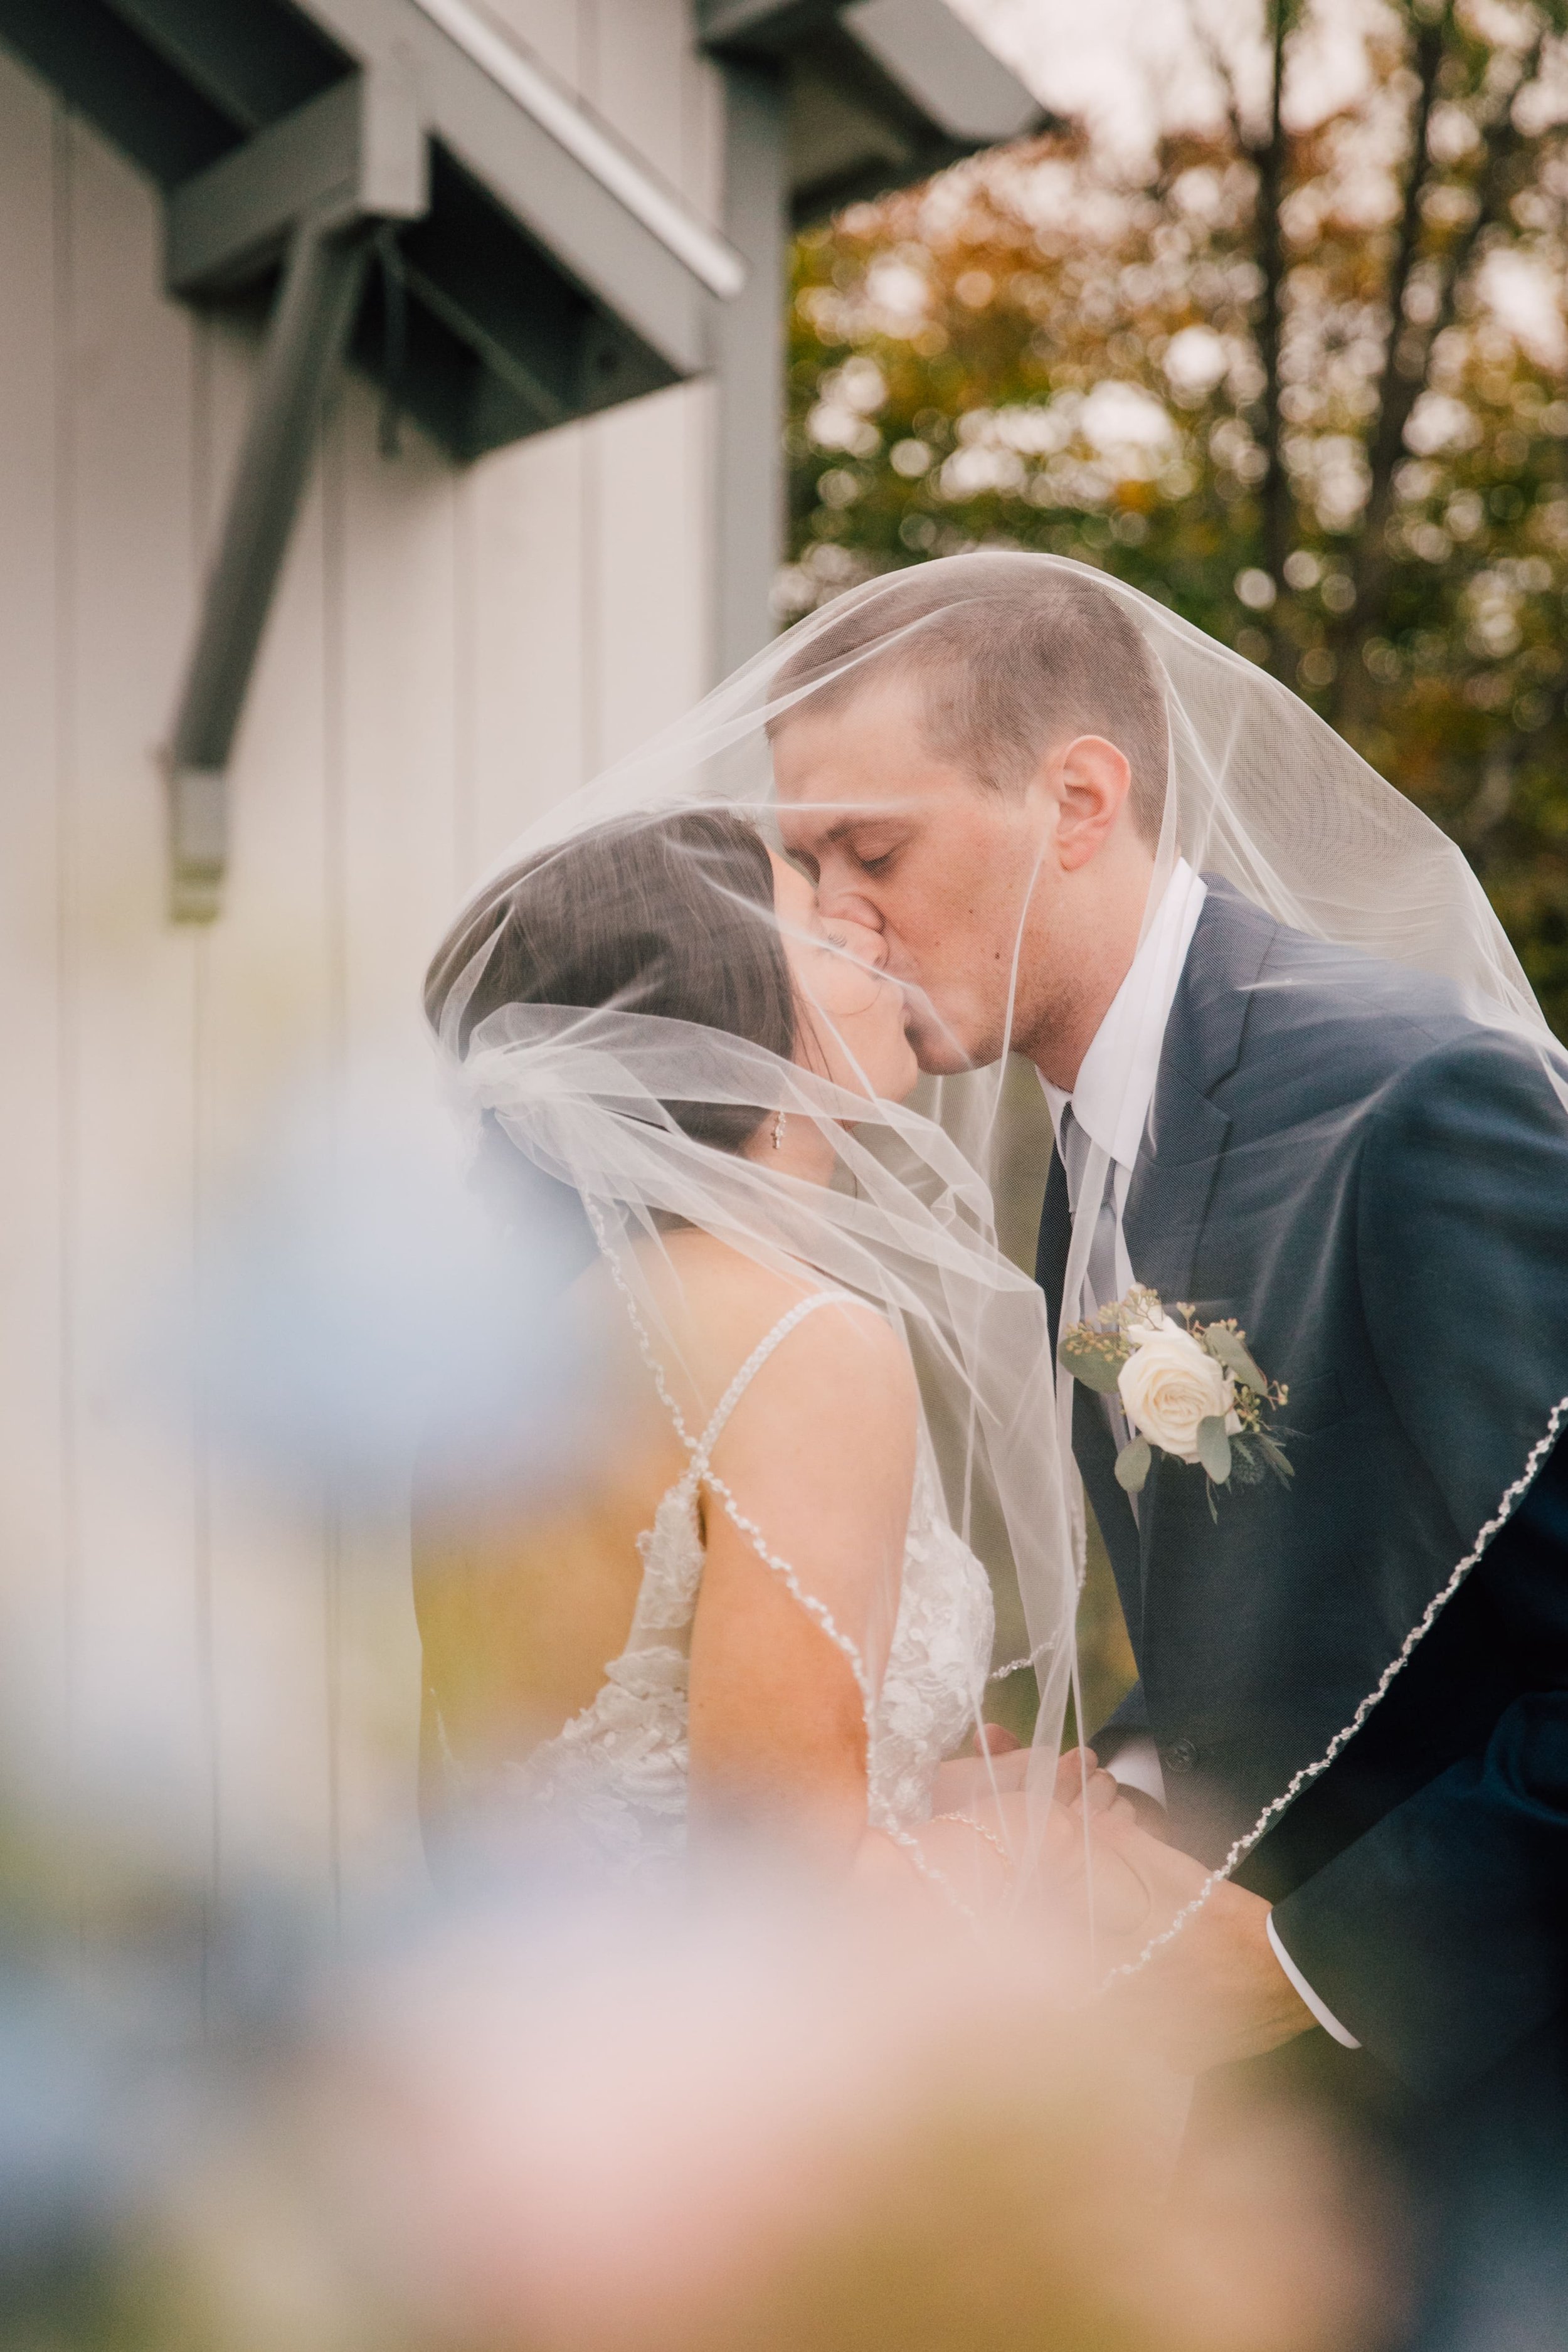  the bride and groom kiss under her veil while posing for fall wedding photos 